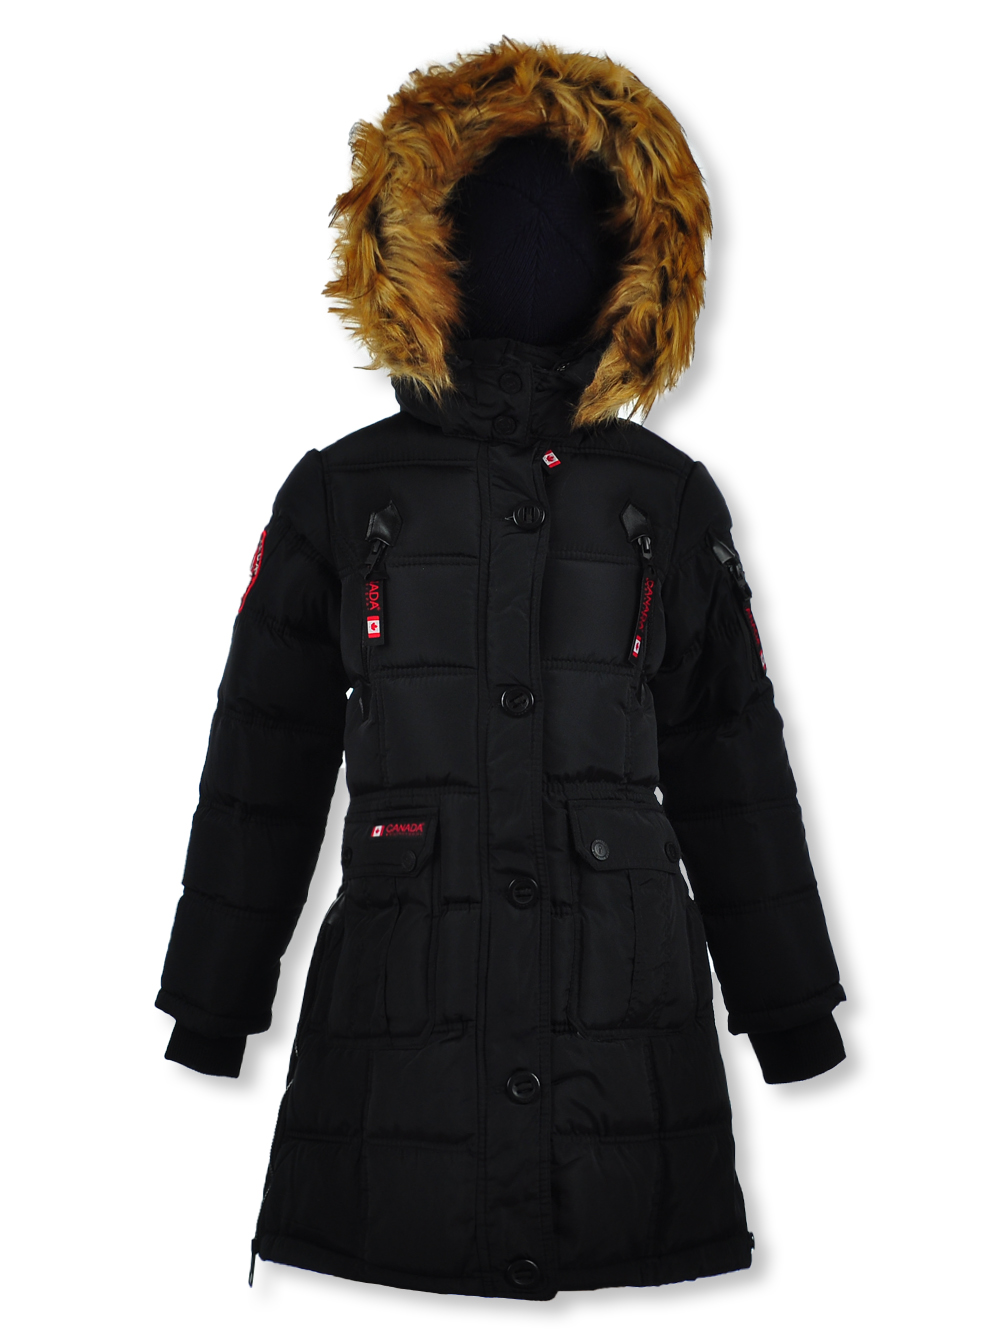 Canada Weather Gear Girls' Faux-Fur Long Parka - black/natural, 2t (Toddler) - image 2 of 3